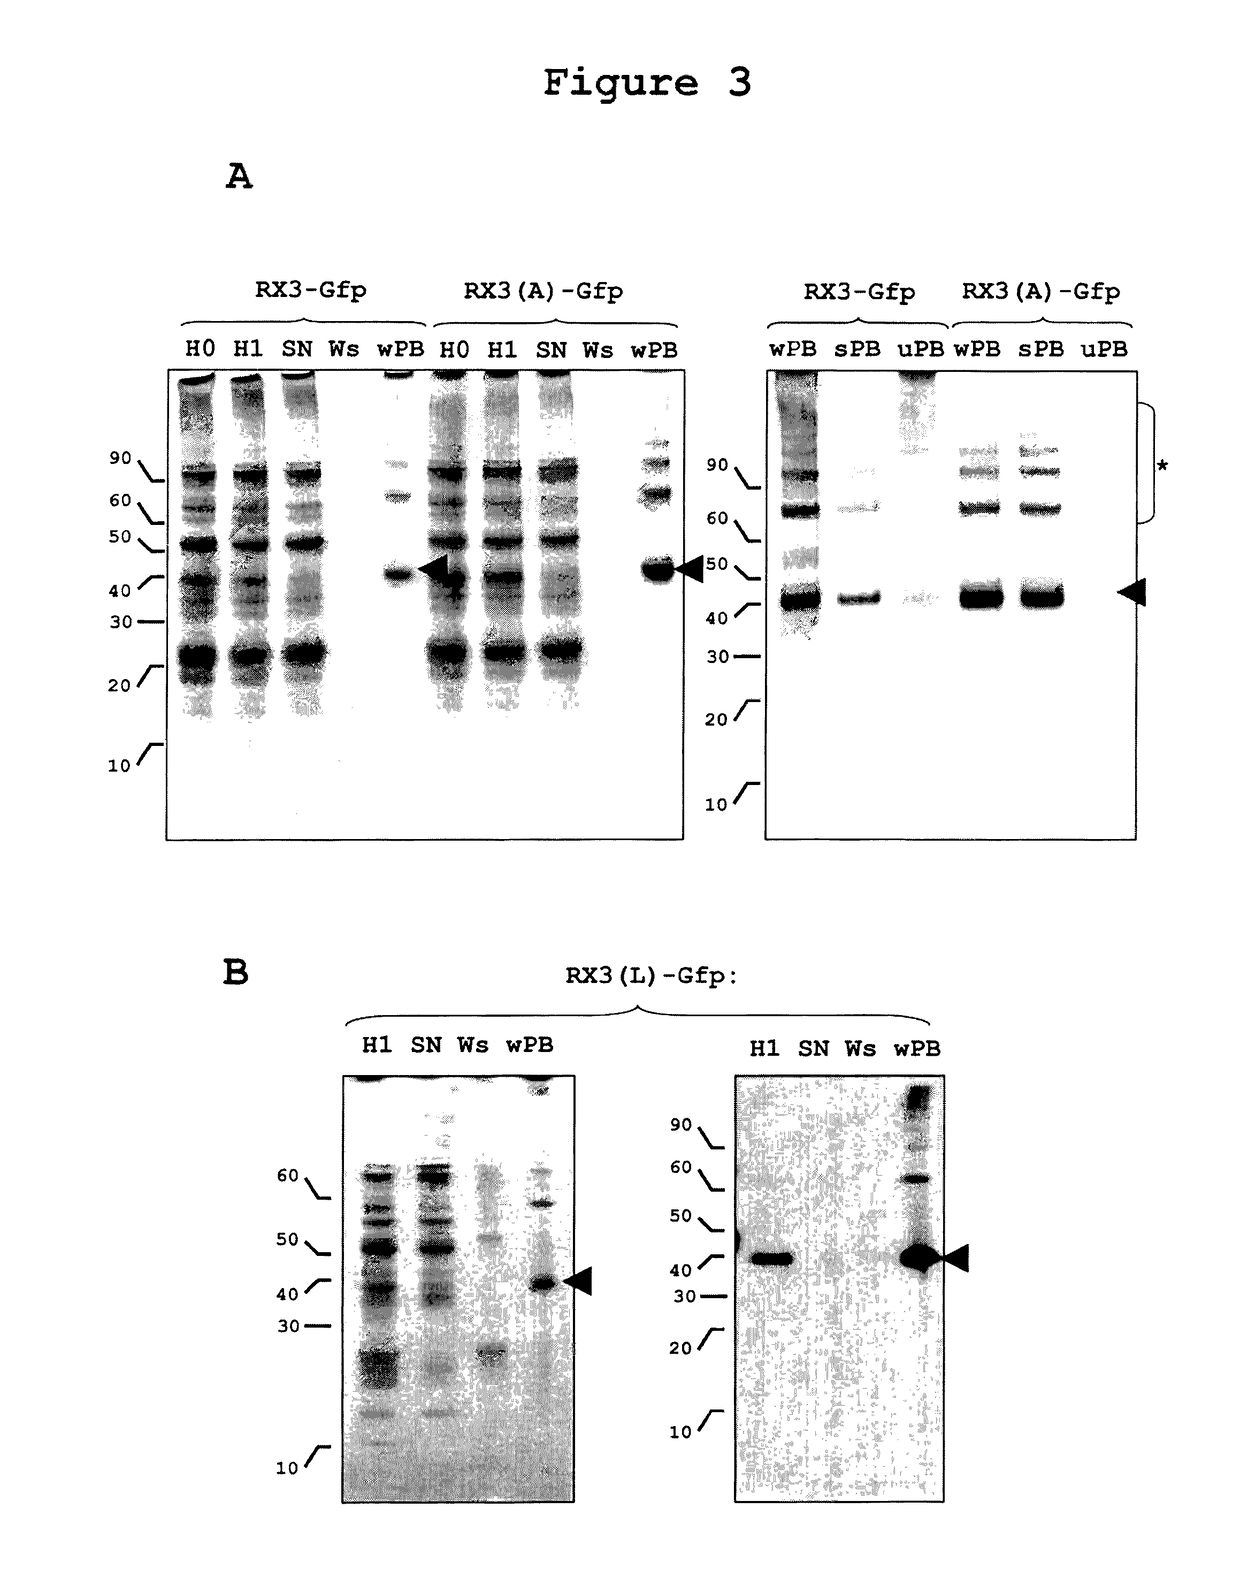 Recombinant protein body-inducing polypeptides